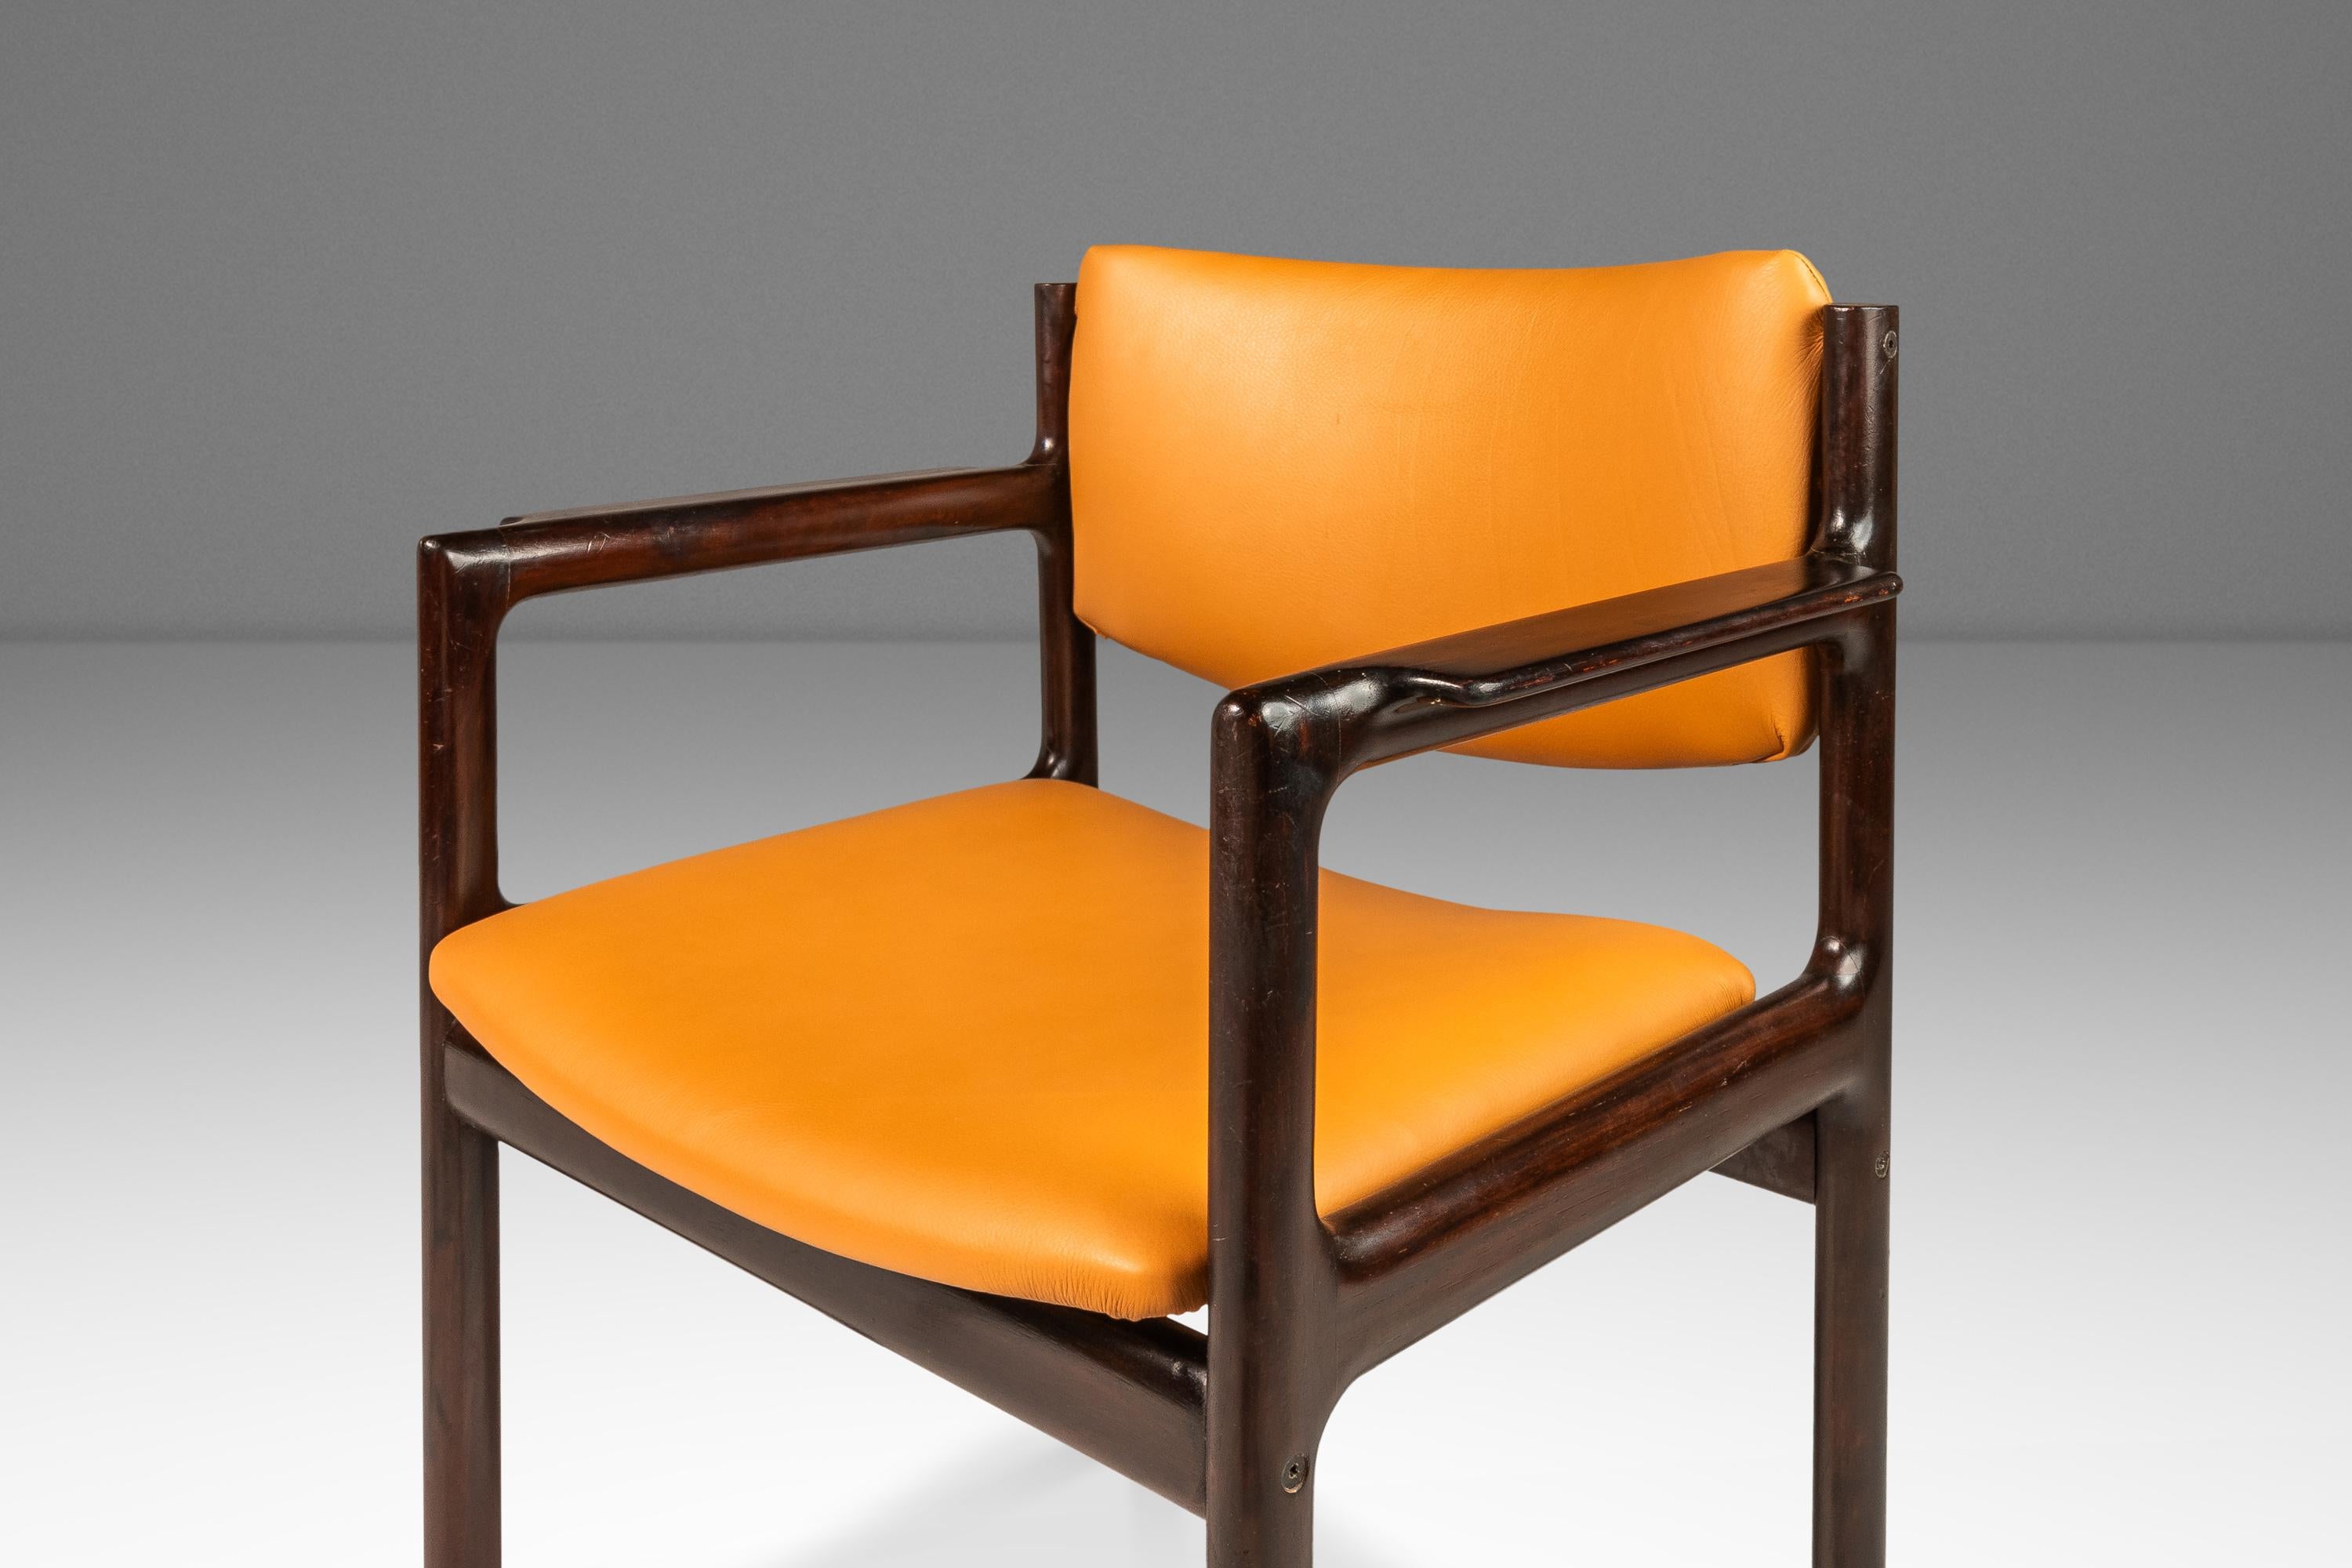 Set of 2 Mahogany & Leather Arm Chairs, Danish Overseas Imports, c. 1960's For Sale 11